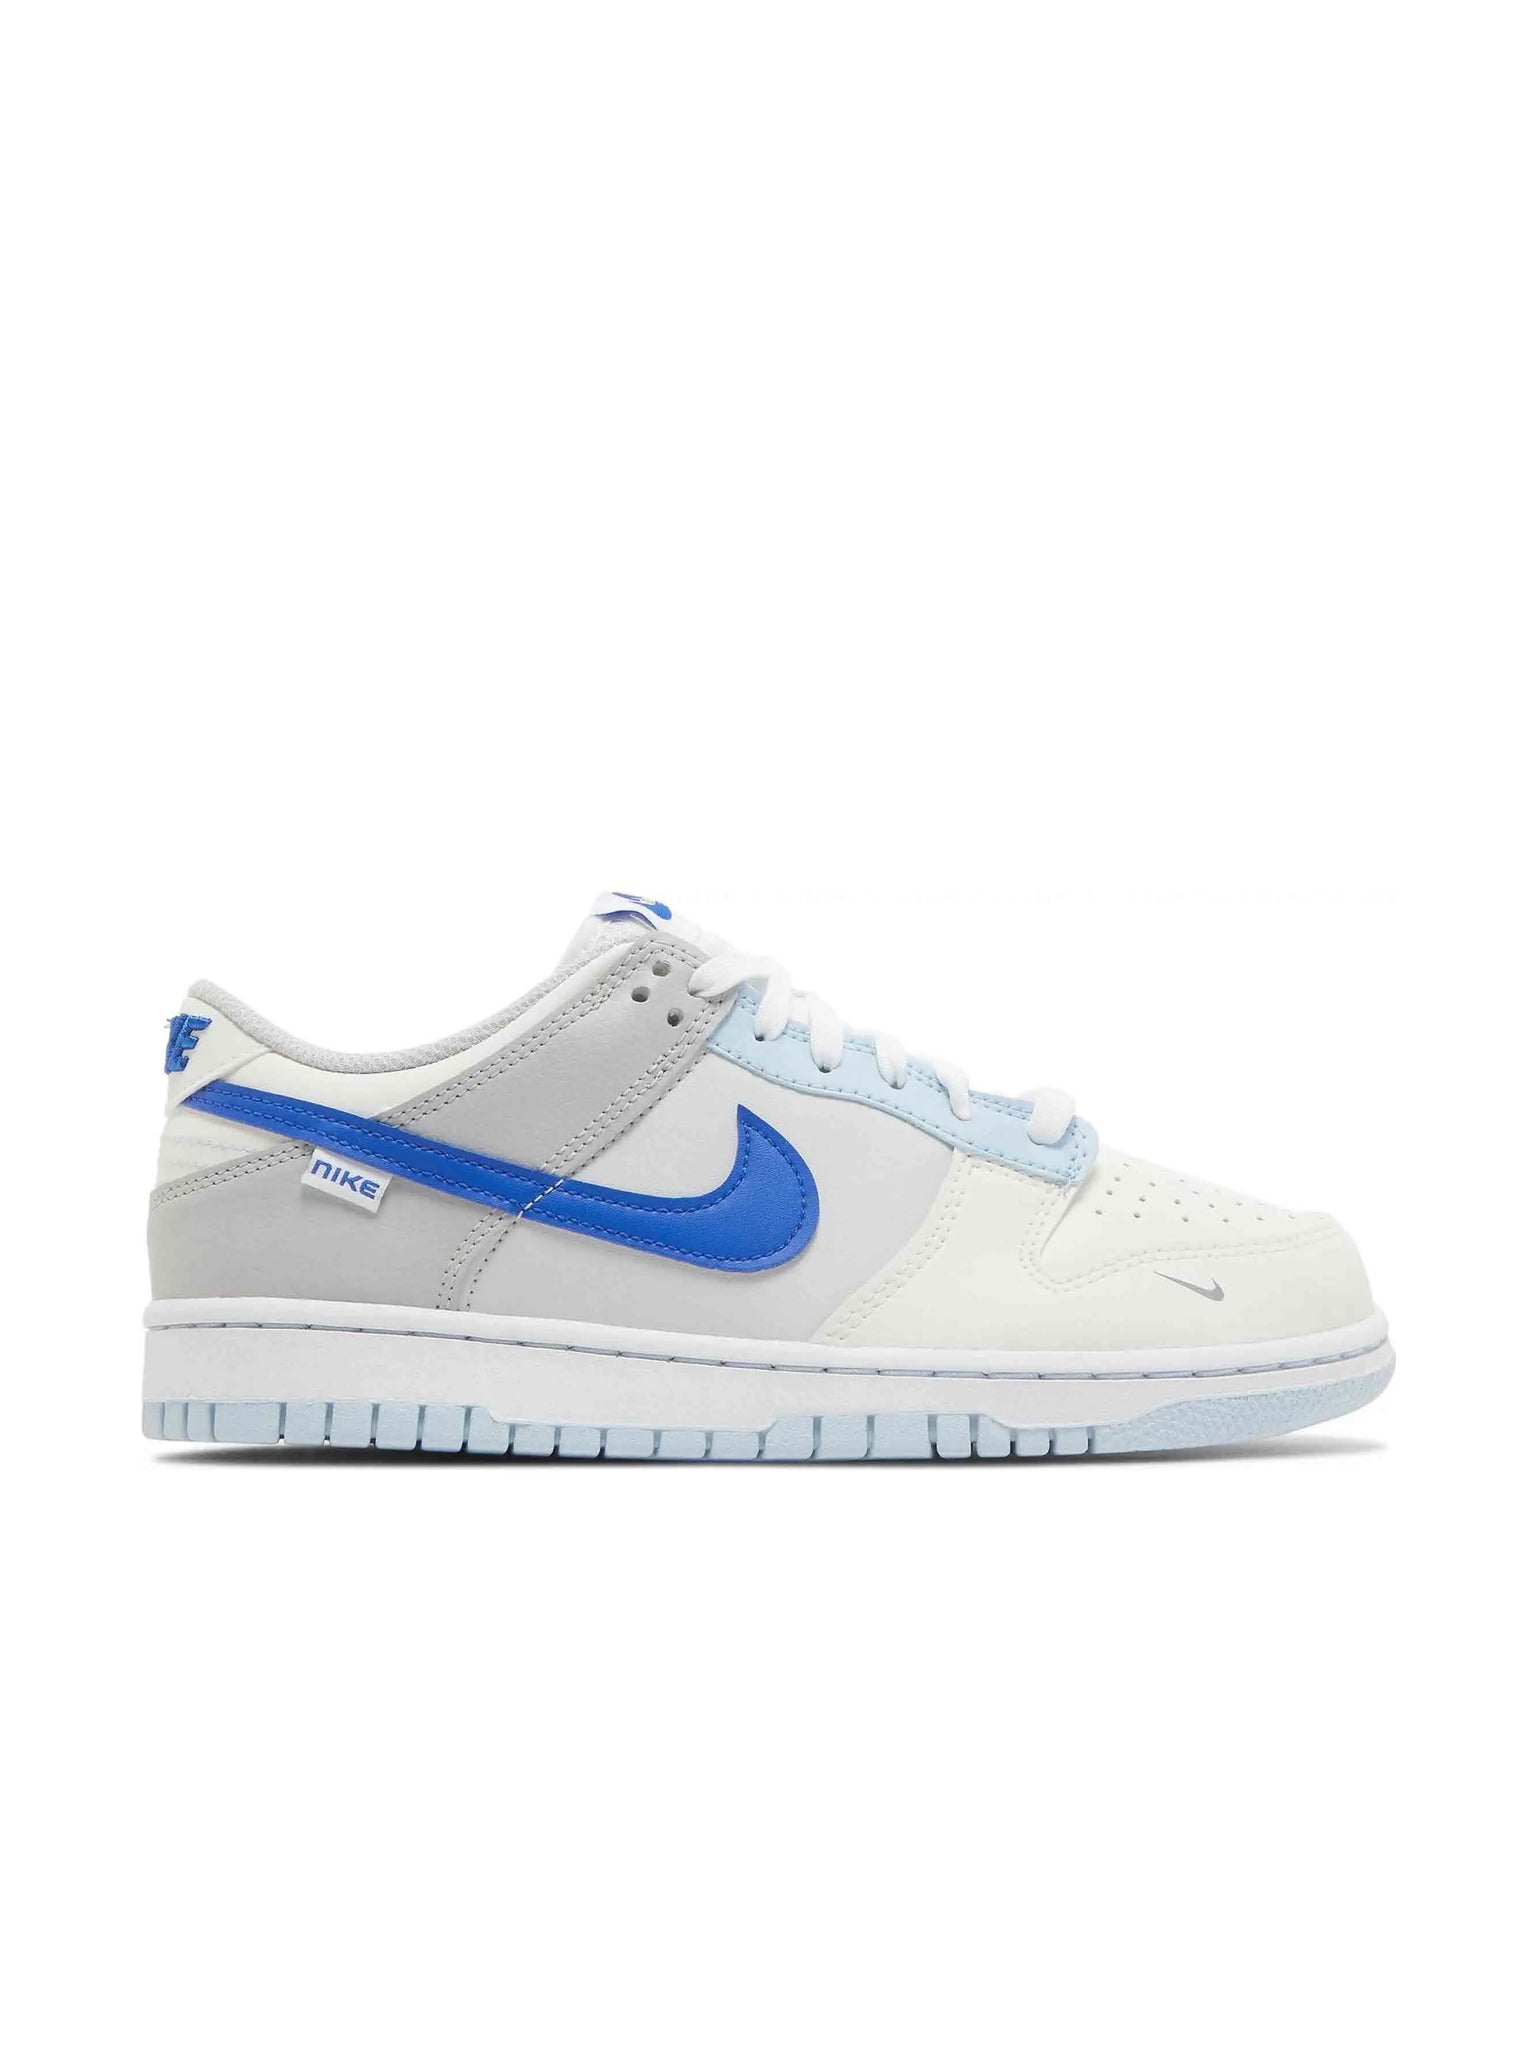 Nike Dunk Low Ivory Hyper Royal (GS) Prior